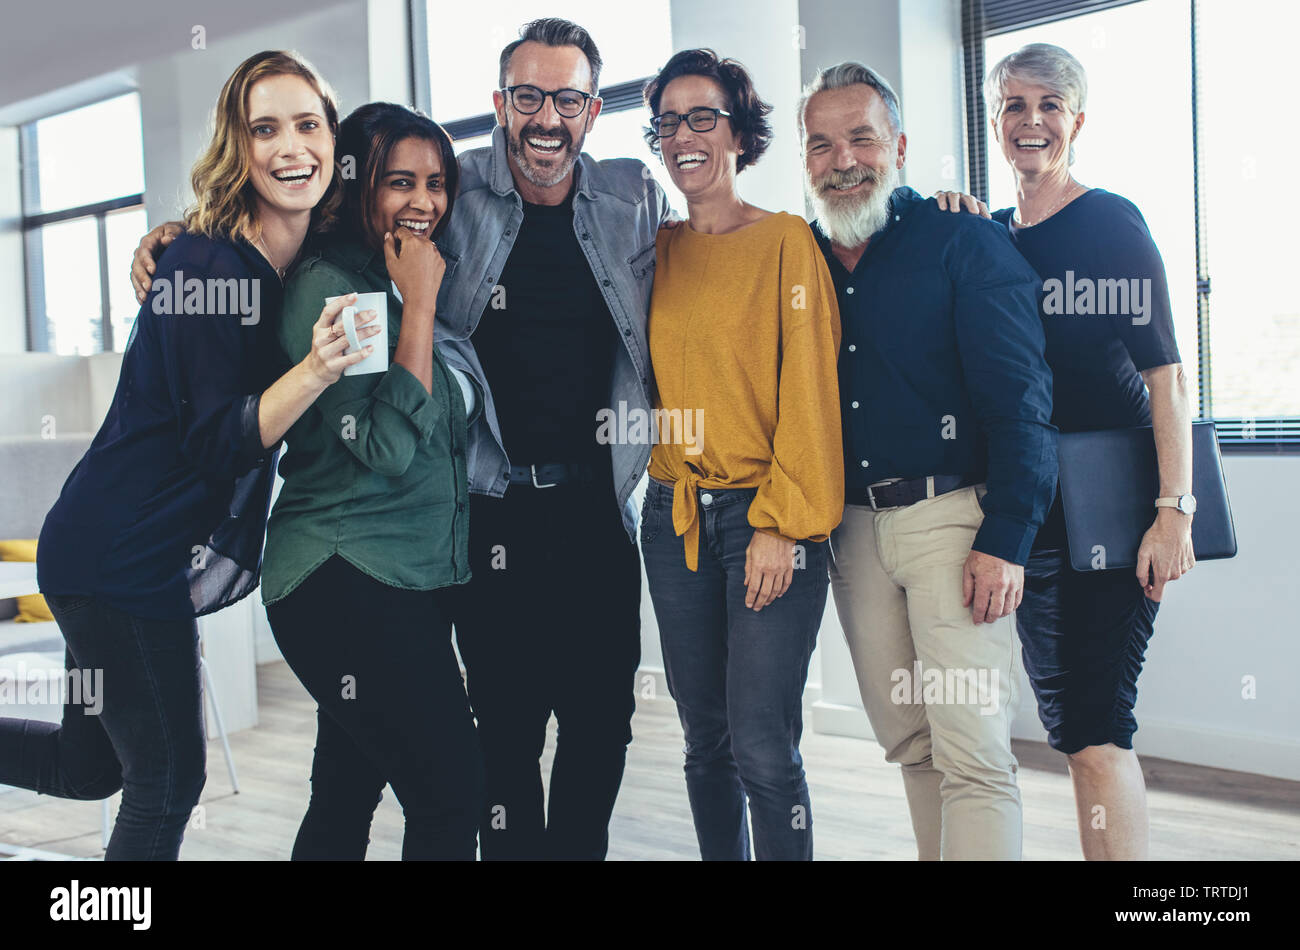 Cheerful business people standing together and laughing. Team of business professionals looking at camera and smiling. Stock Photo